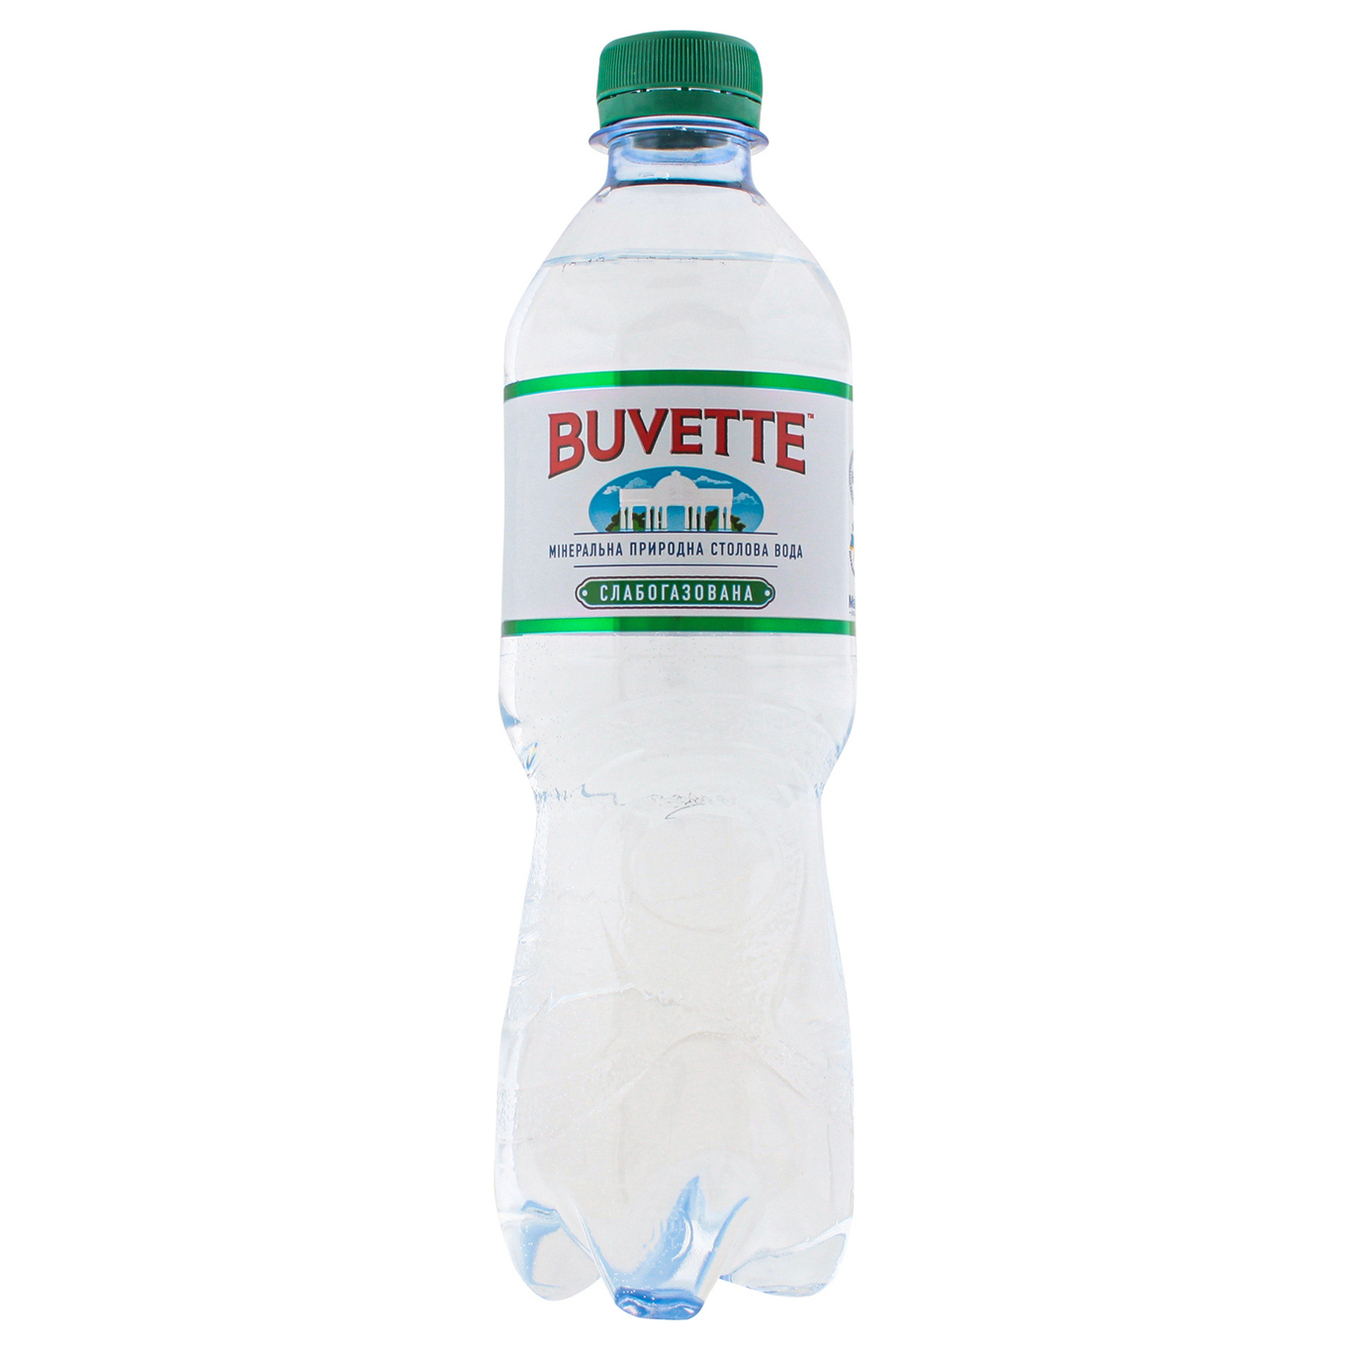 Buvette Mineral water slightly carbonated natural table 0,5l